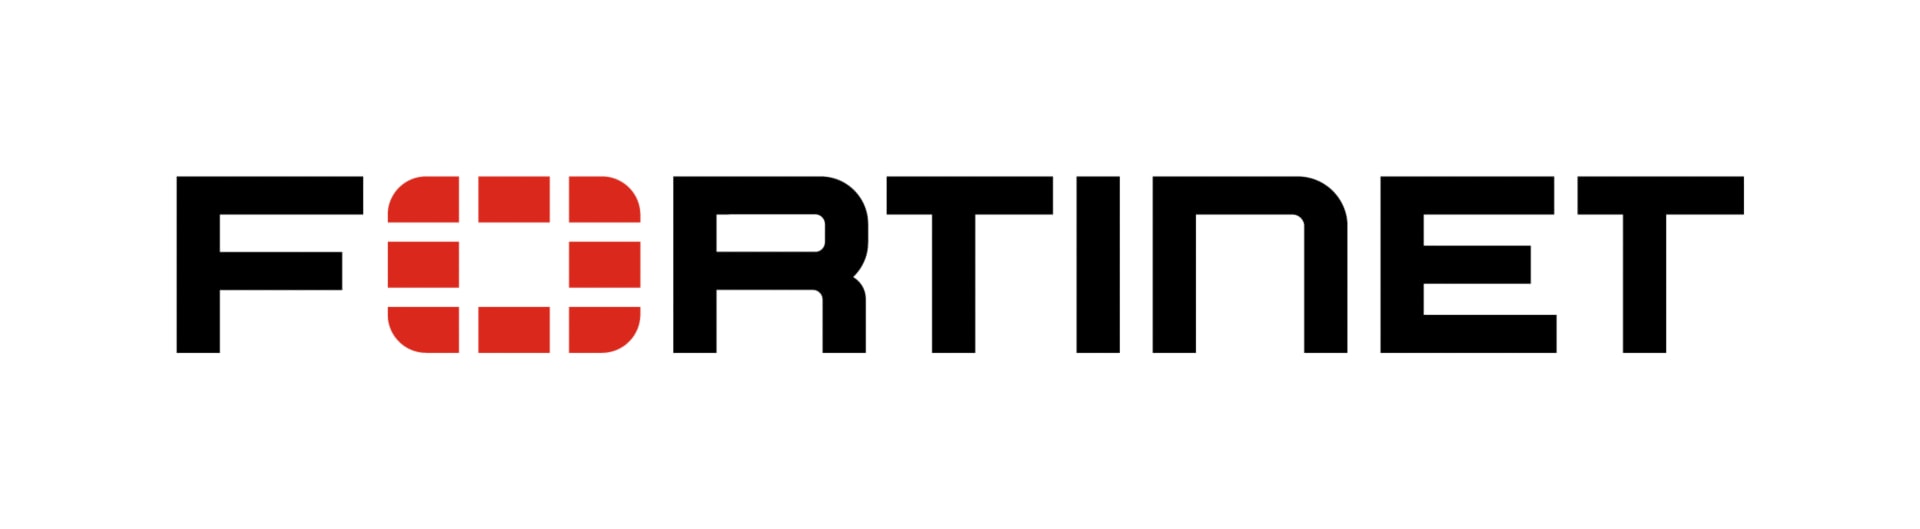 Fortinet Advanced Threat Protection - subscription license (5 years) + FortiCare 24x7 - 1 license